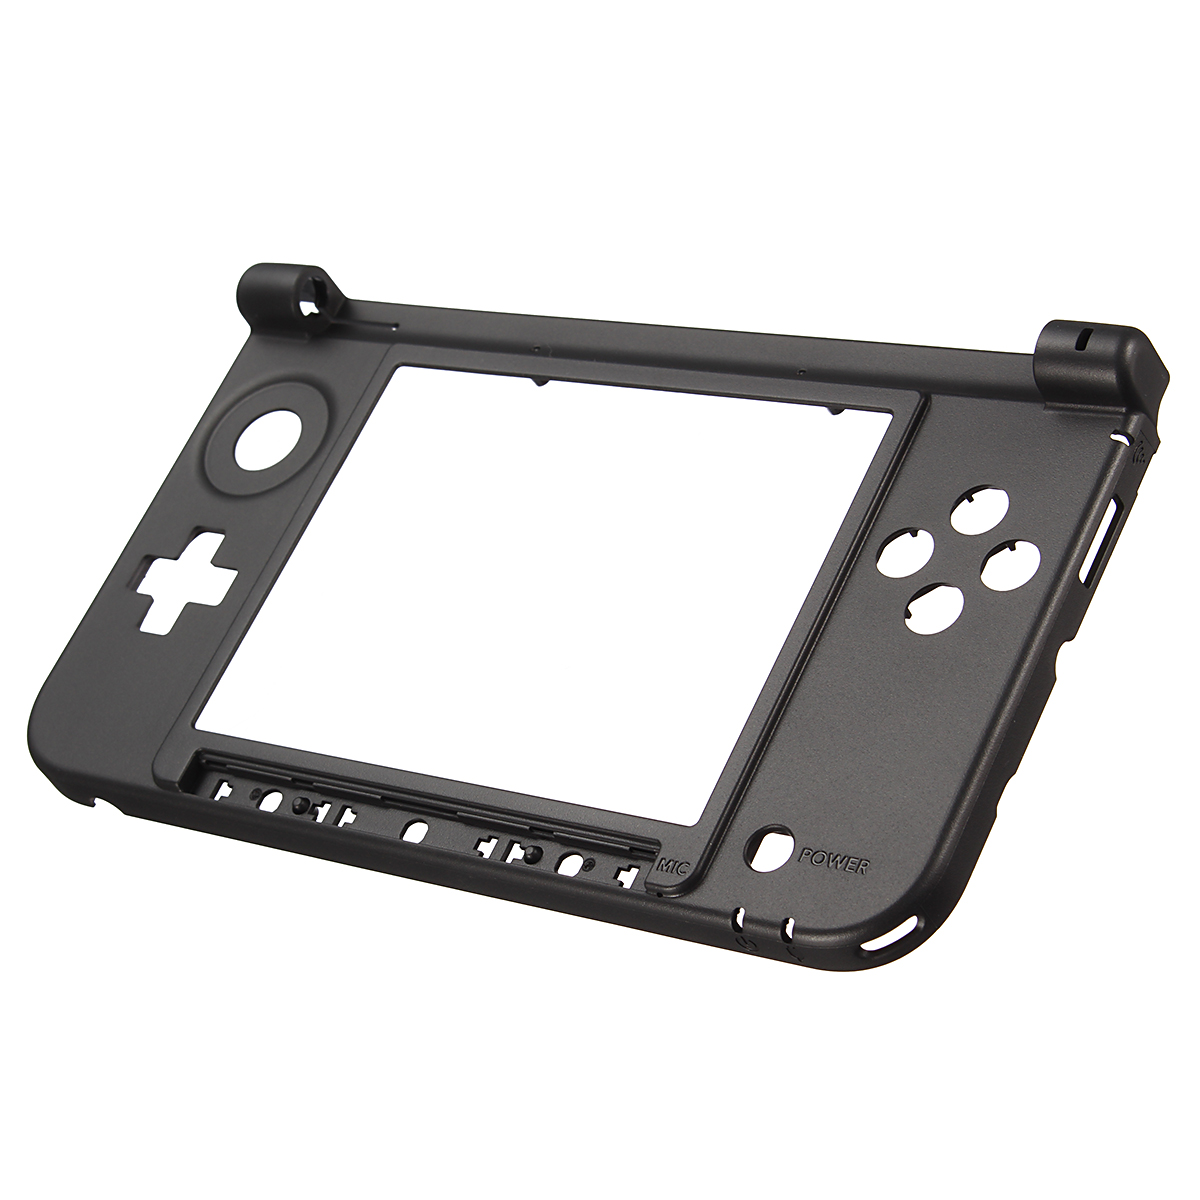 Replacement Bottom Middle Frame Housing Shell Cover Case for Nintendo 3DS XL 3DS LL Game Console 54